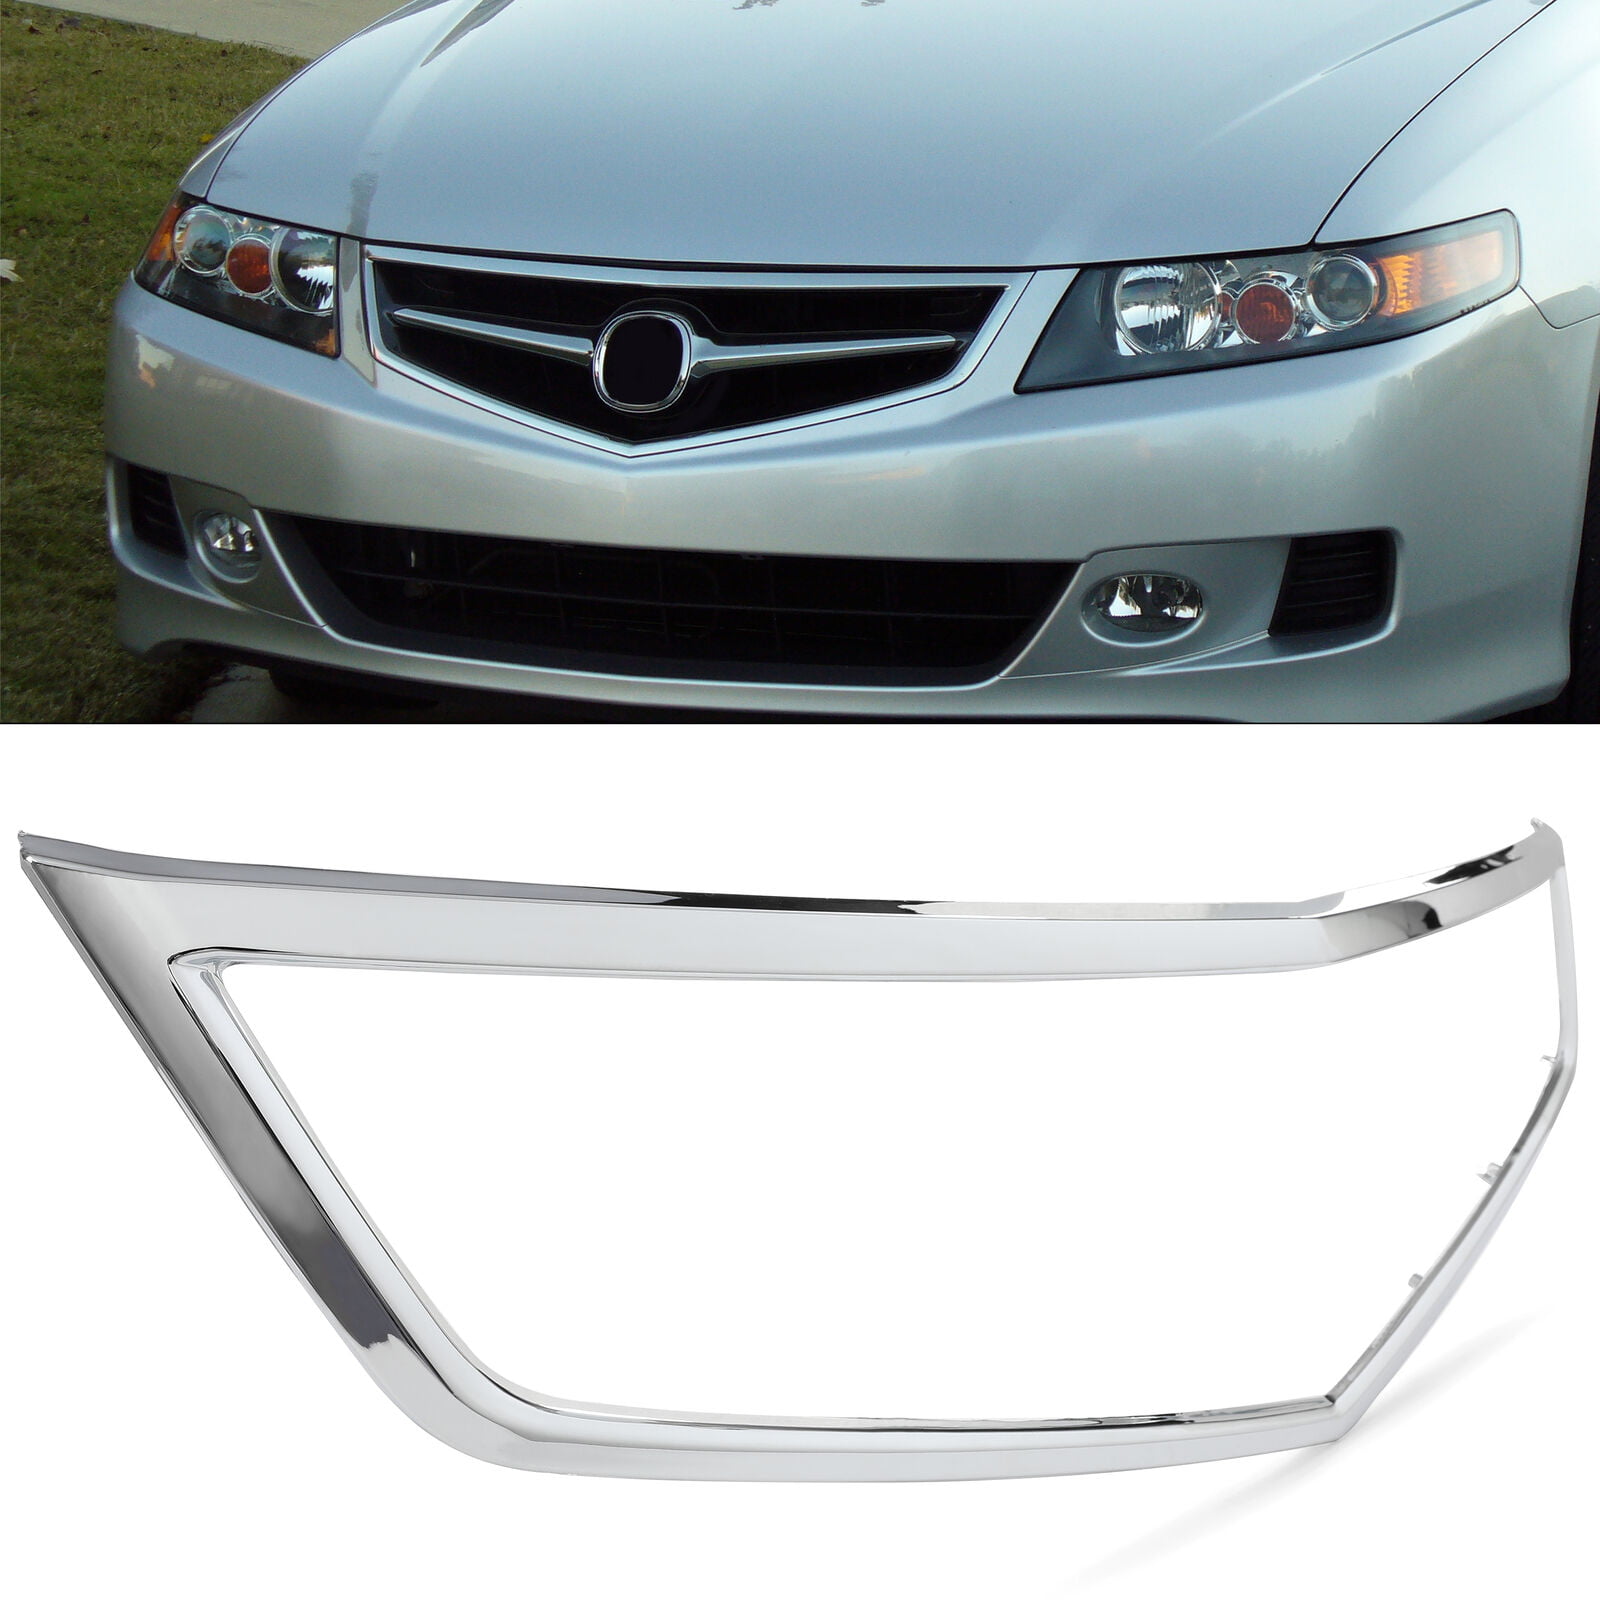 Koolzap For 06-08 TSX Front Grille Outer Shell Trim Molding Surround AC1210108 71122SECA02 